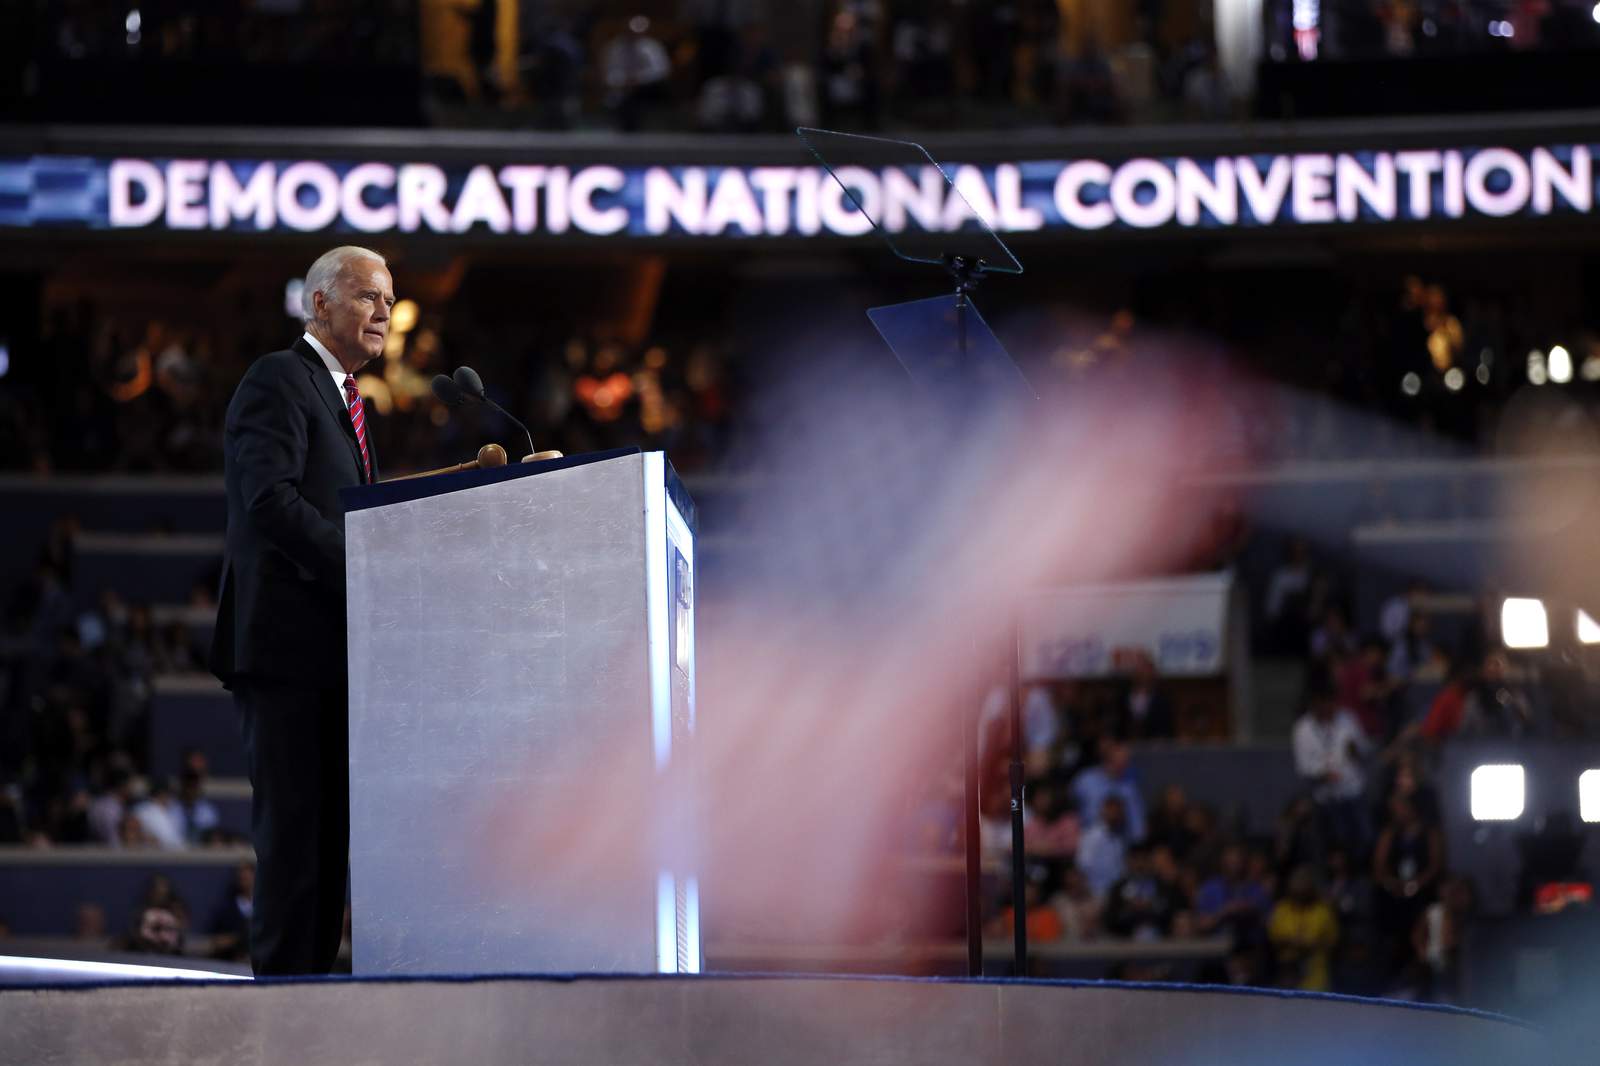 LIVE STREAM: Day 1 of 2020 Democratic National Convention